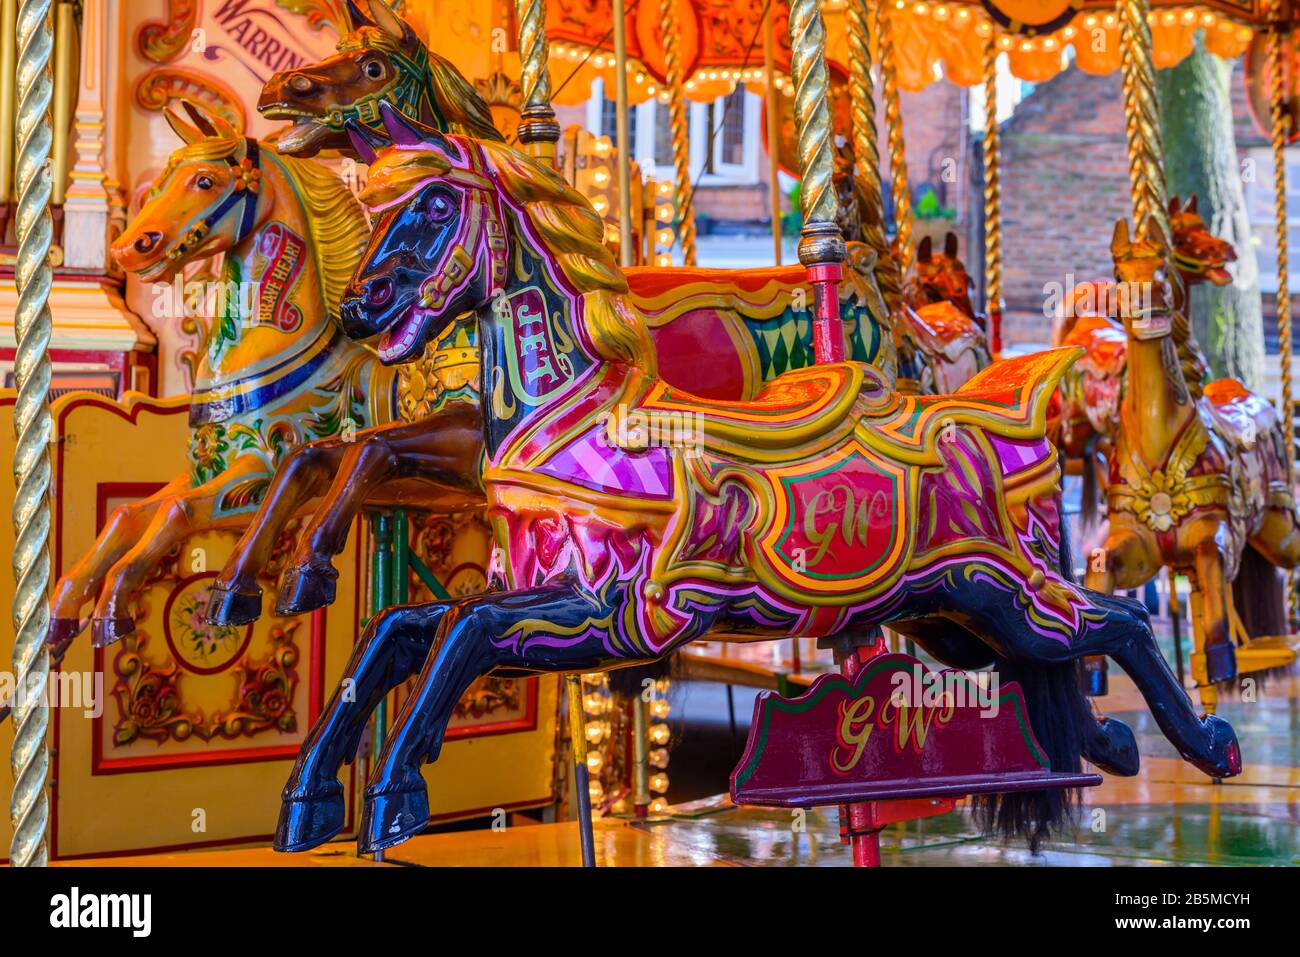 A colourful traditional style carousel with horses on the King's Square in the historic old town of York, North Yorkshire, England. Stock Photo